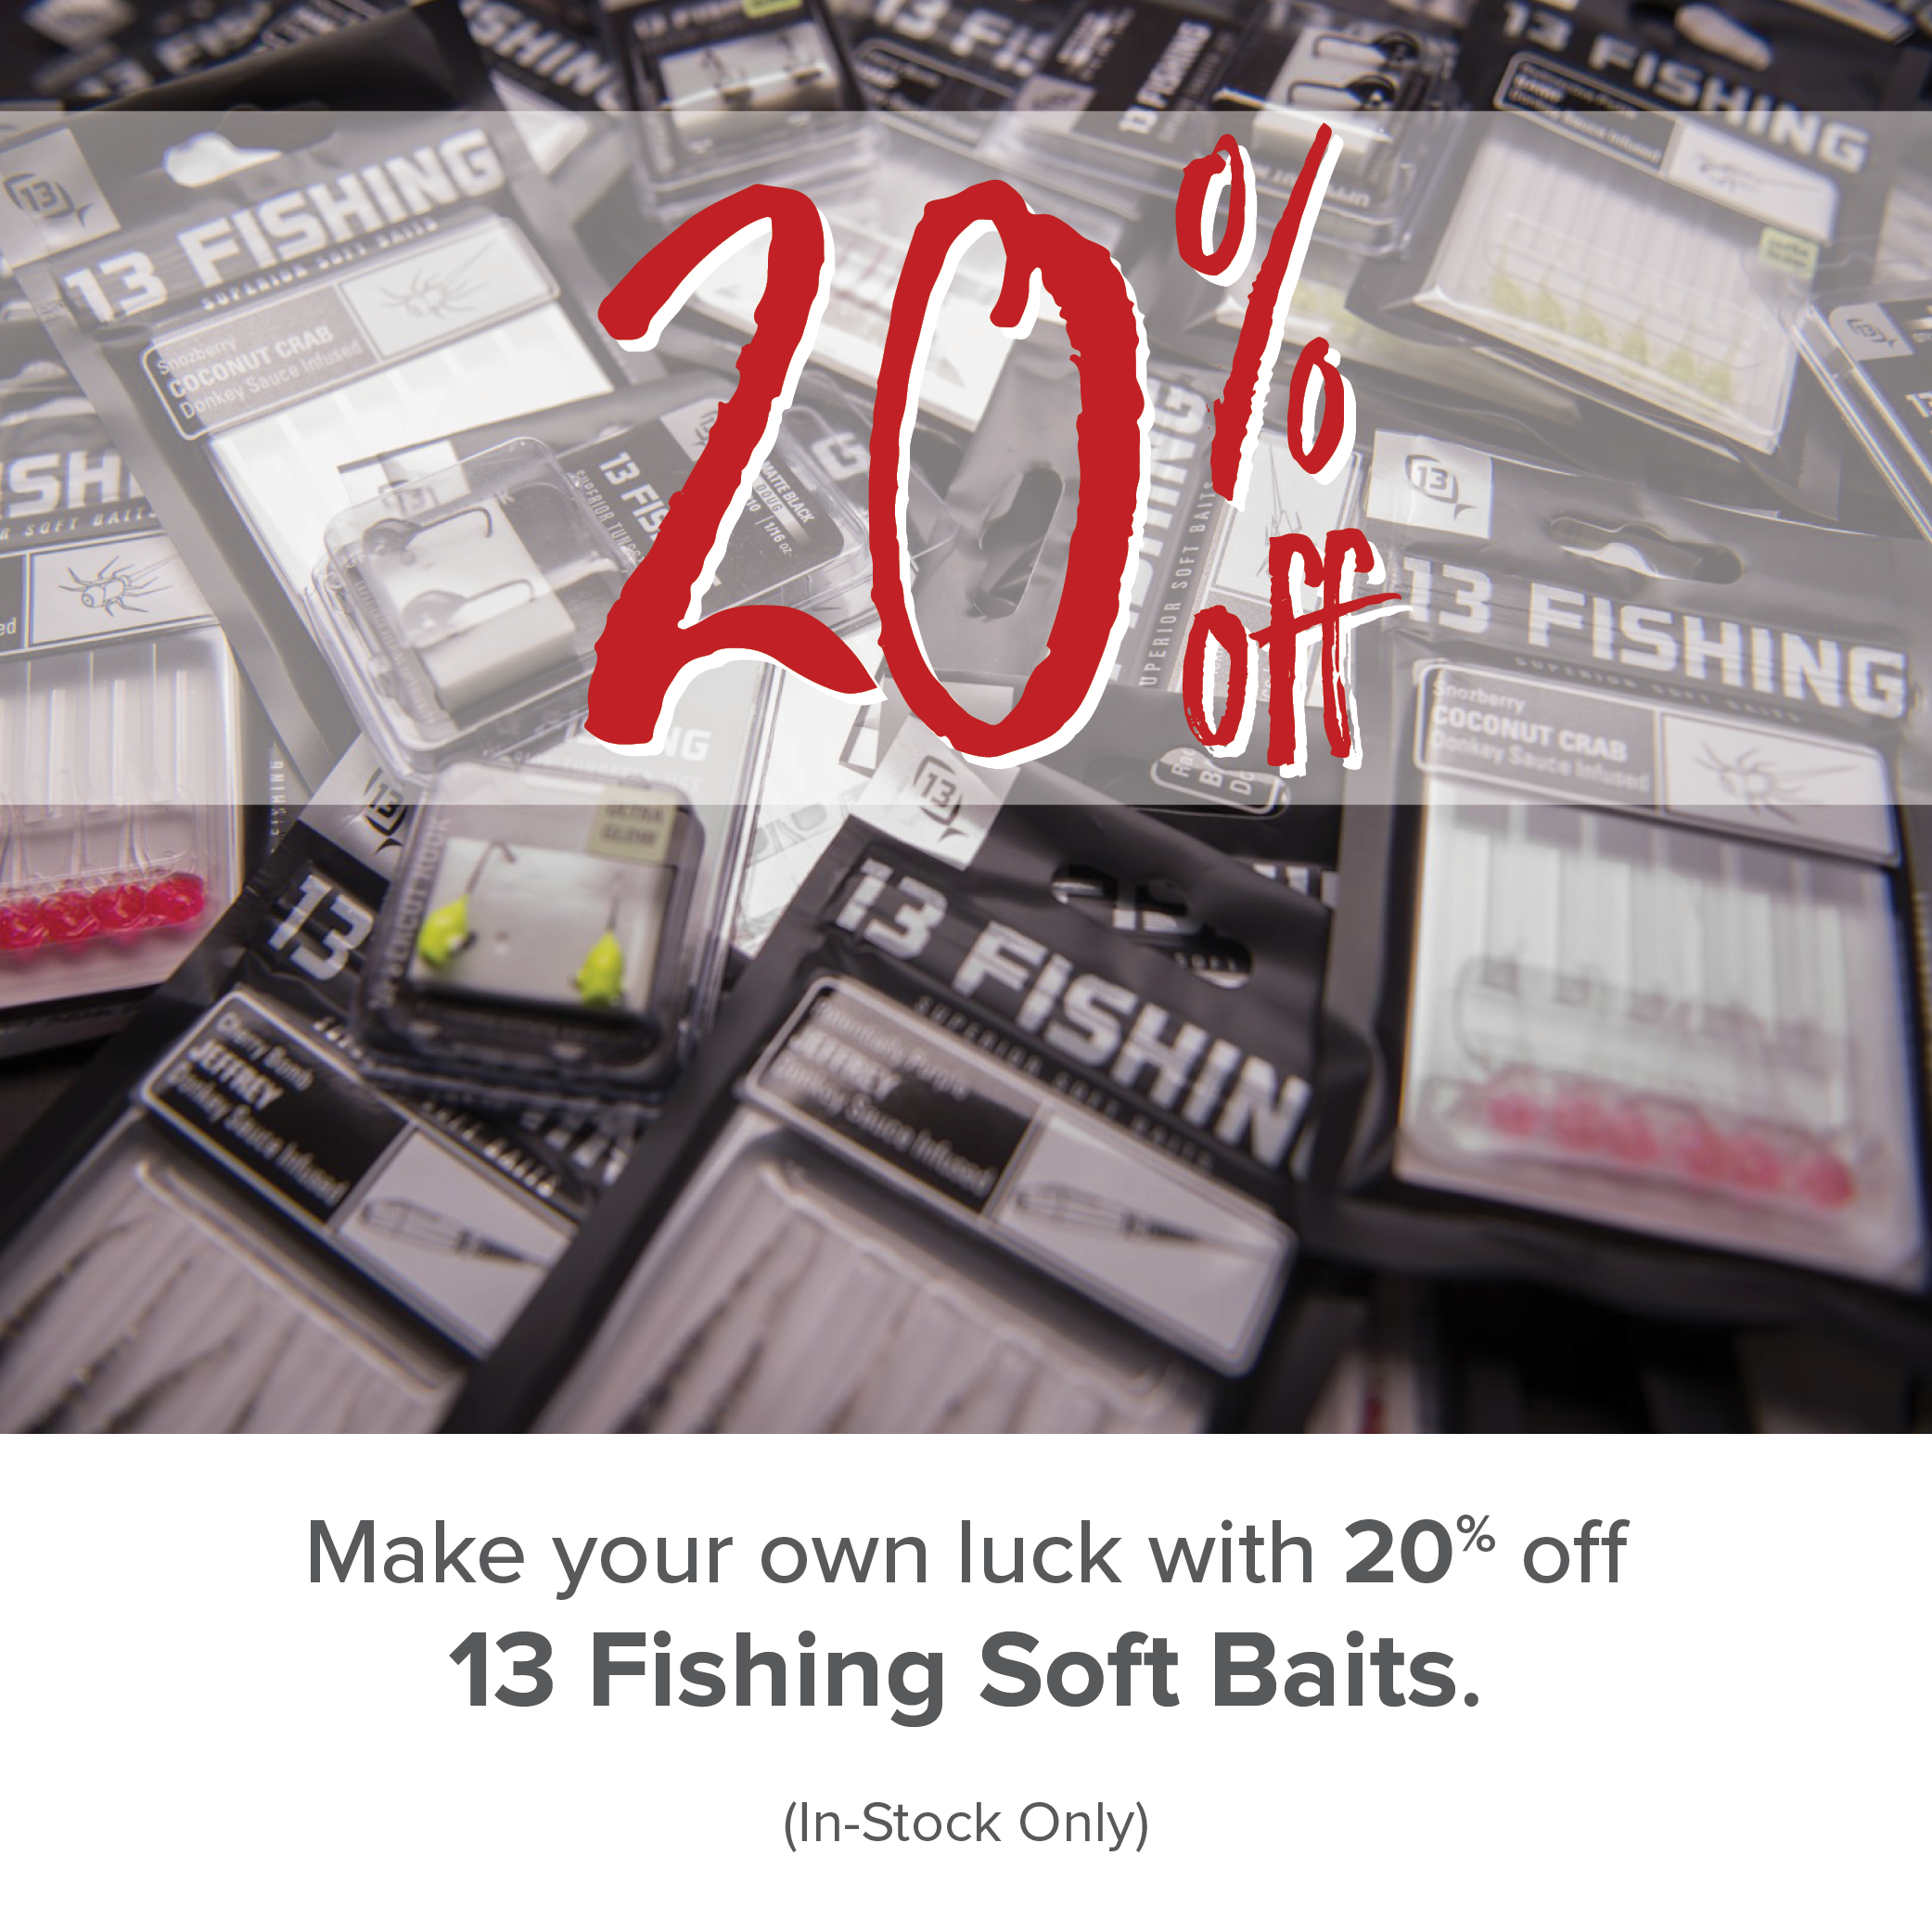 Make your own luck with 20% off 13 Fishing Soft Baits